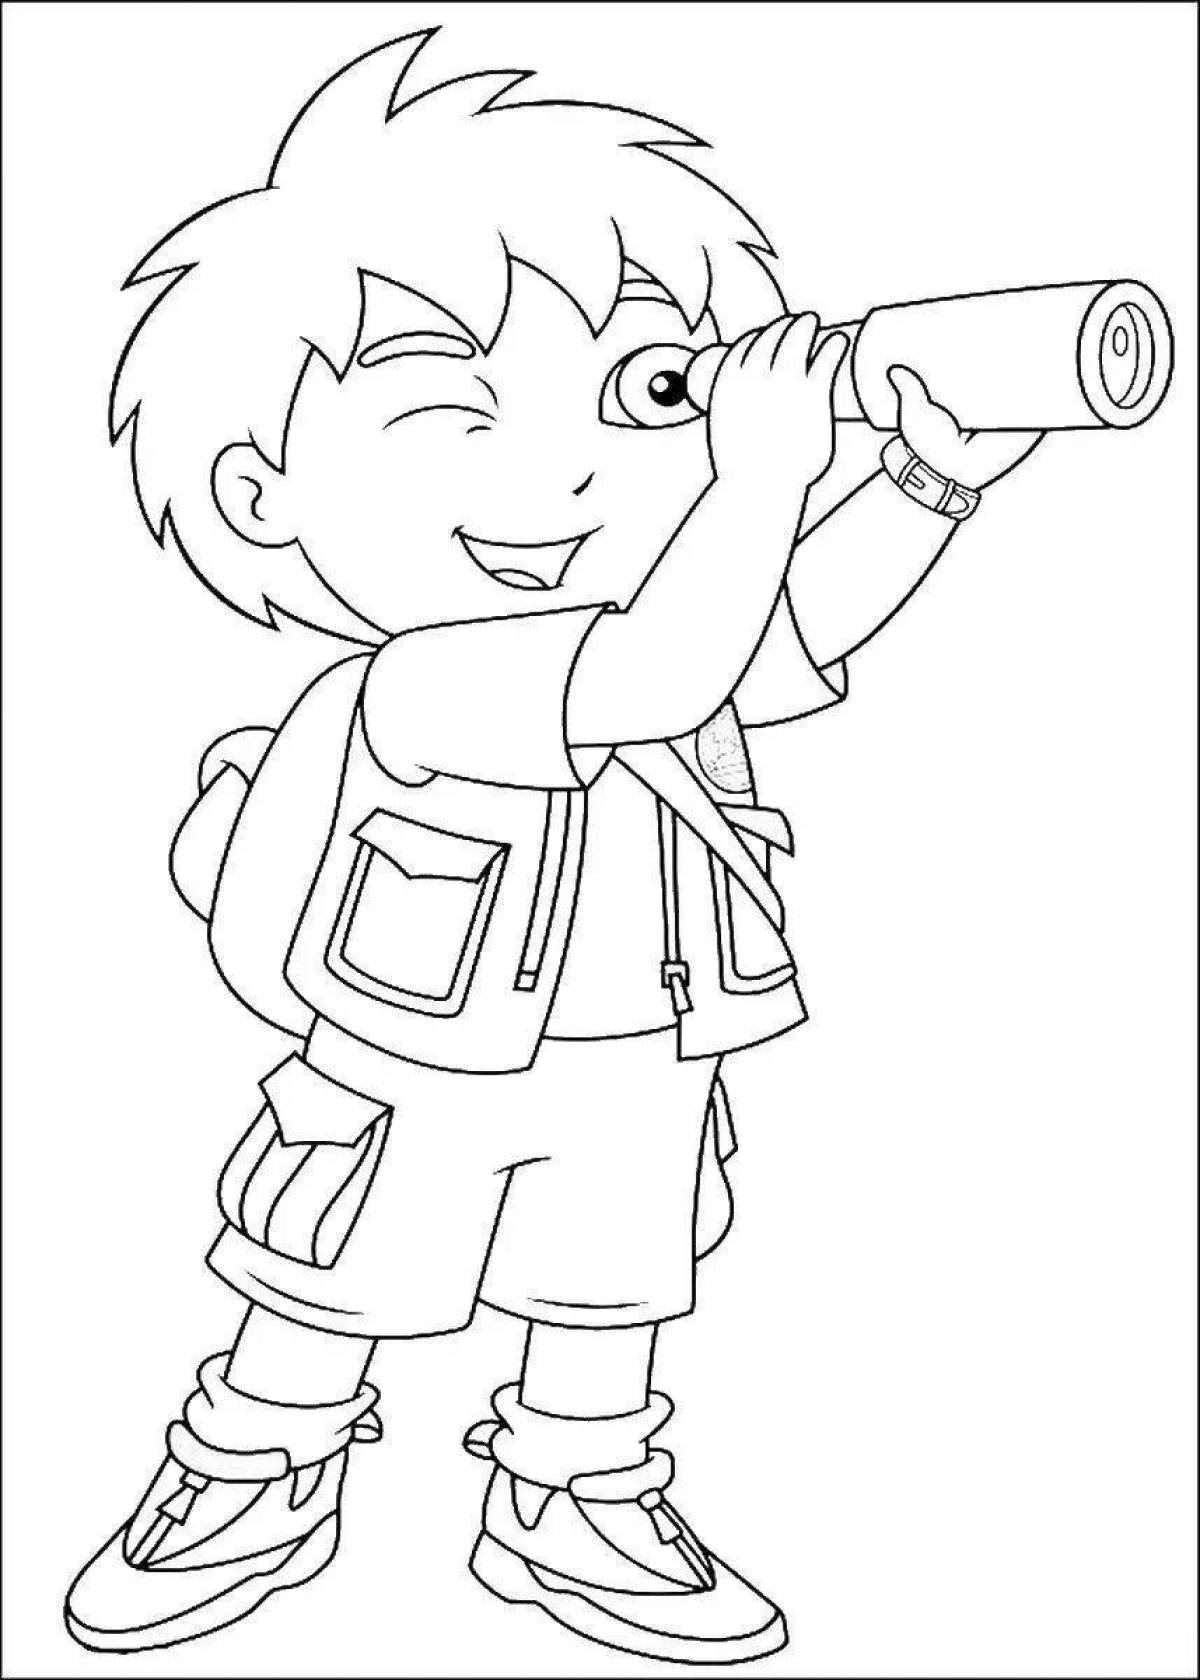 Colouring charming diego